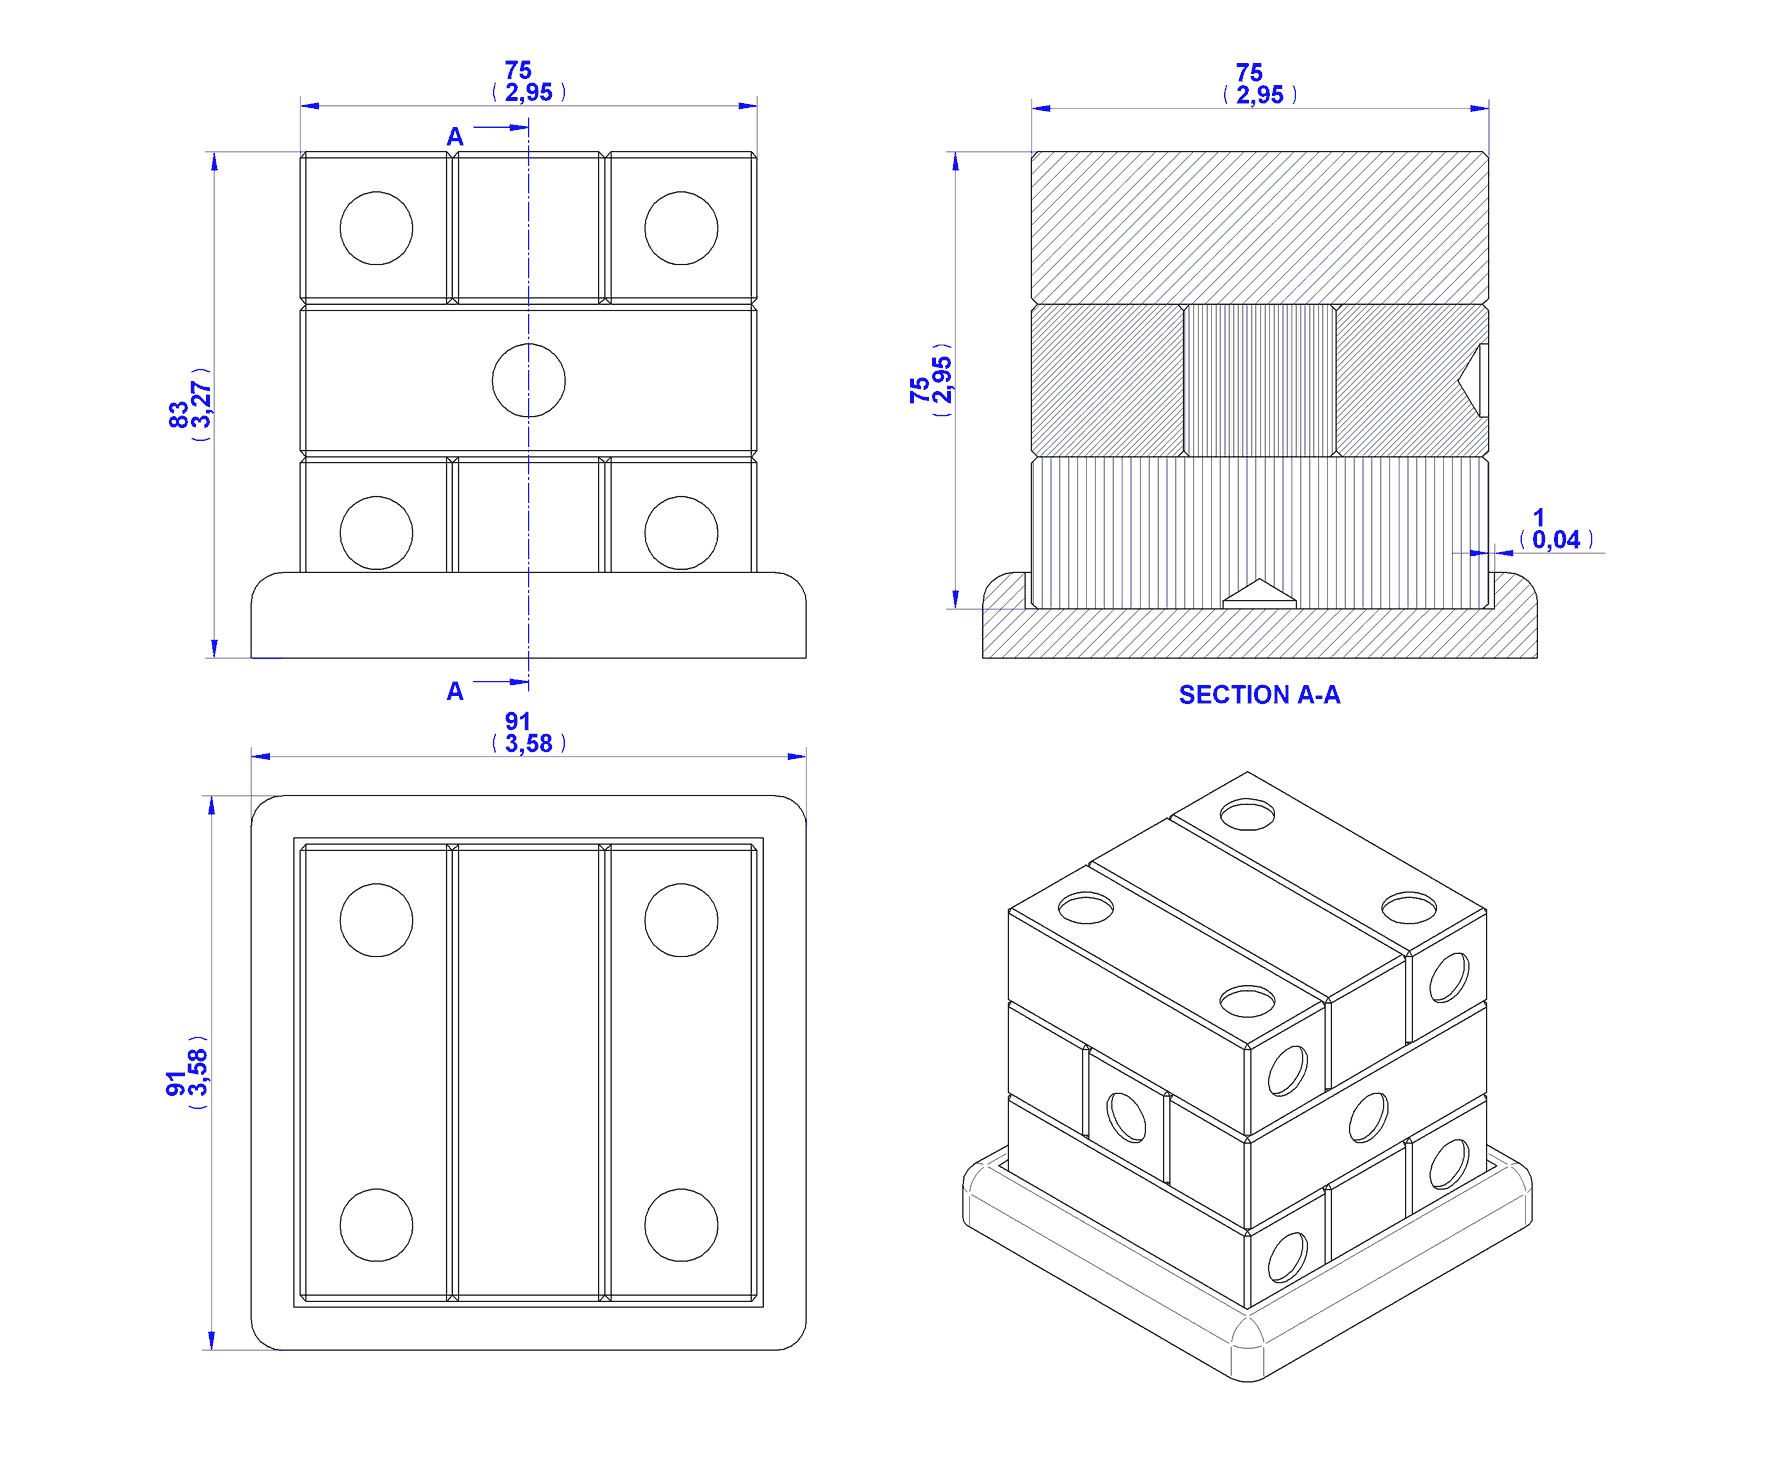 Dice puzzle plan - Assemby drawing